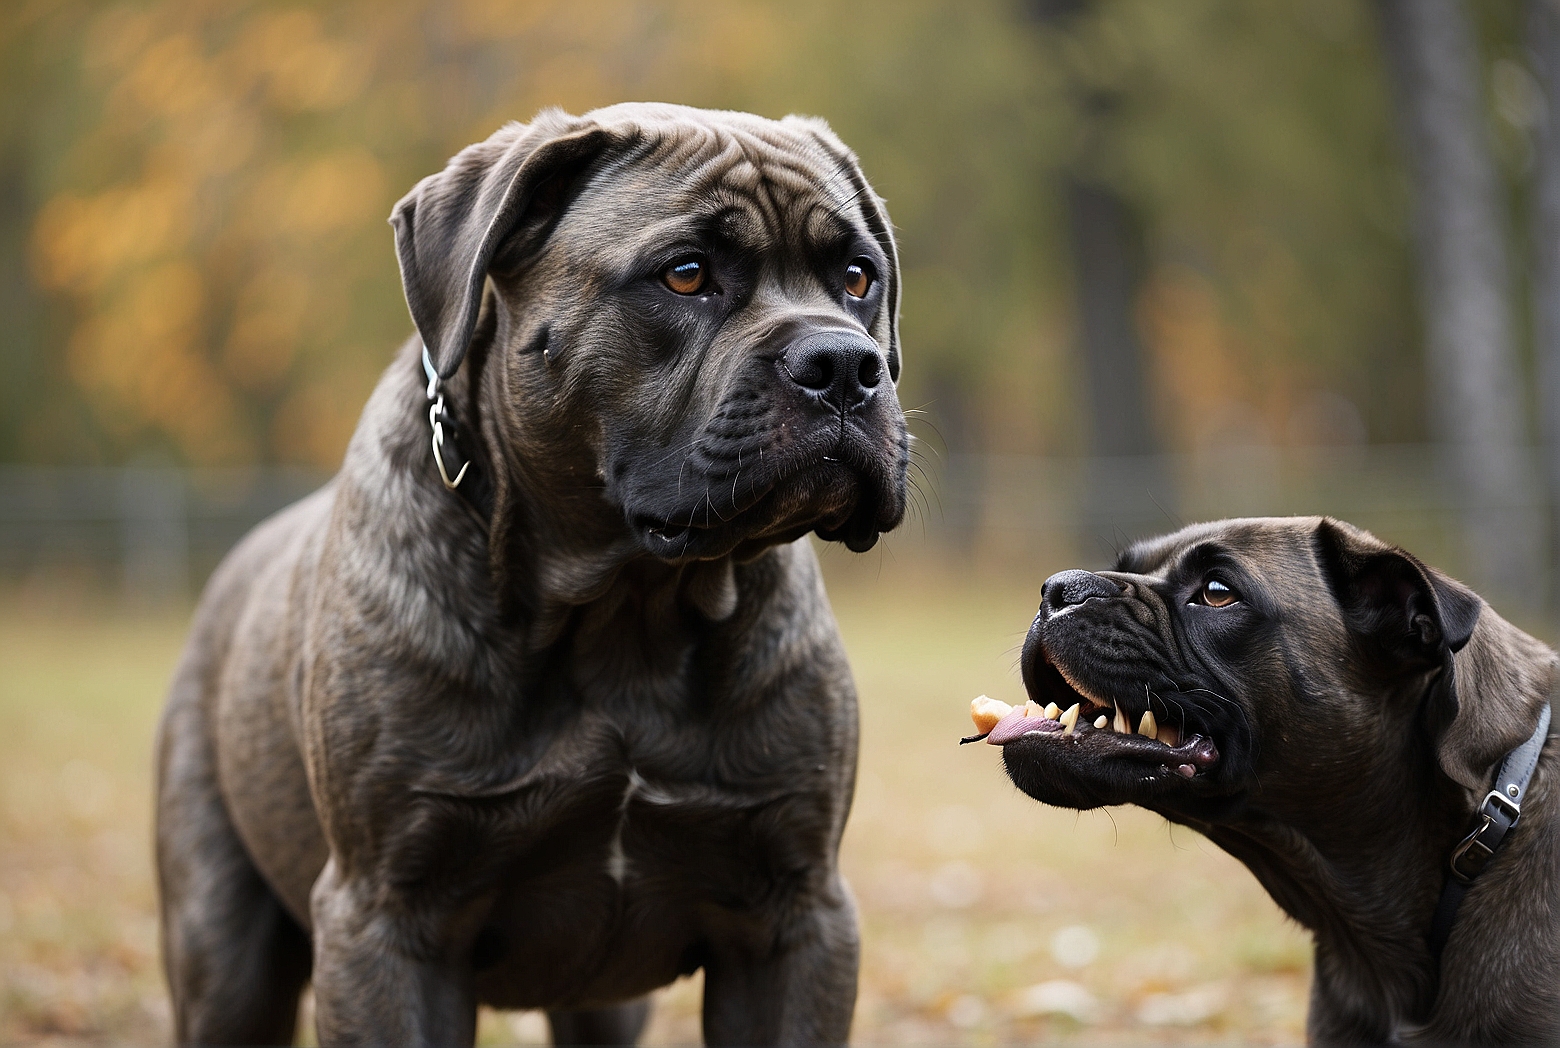 How to Stop a Cane Corso from Biting